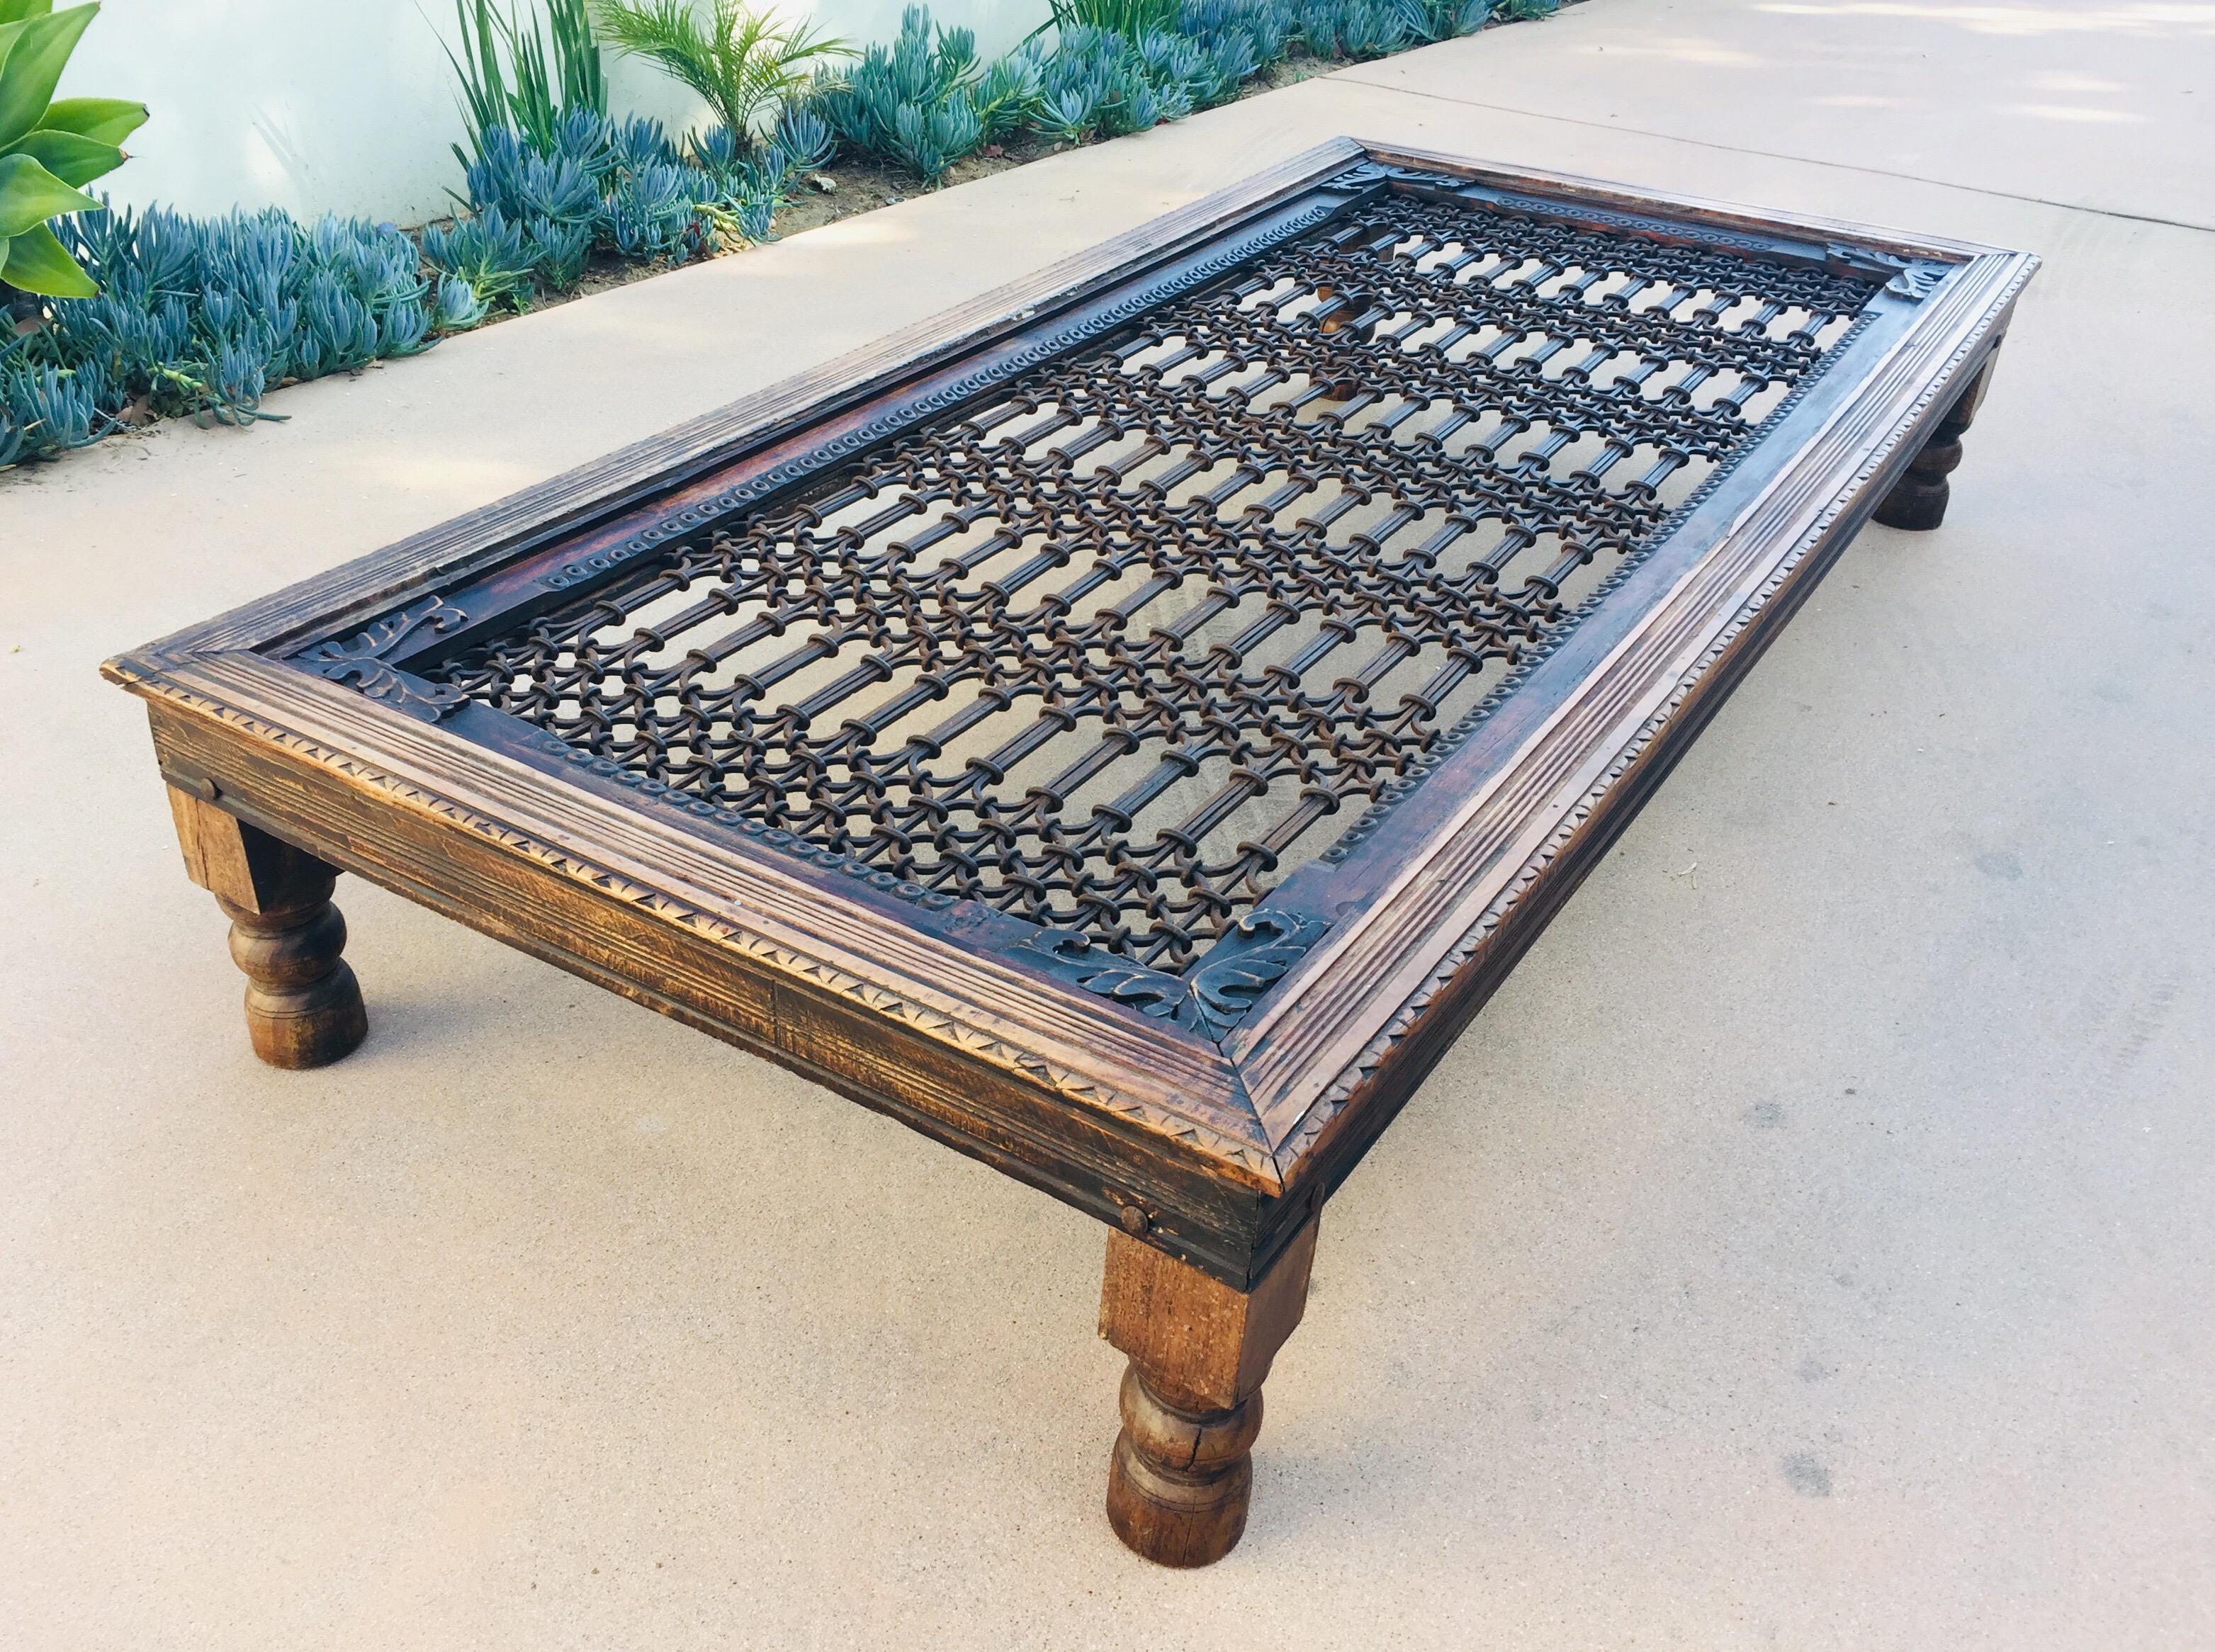 Teak wood coffee table with iron inset jail work.
Large coffee table in solid teak wood with nail heads and metal iron work, very nicely carved legs and sides. 
Antique architectural window screen from India made into a table. 
The hand forged solid